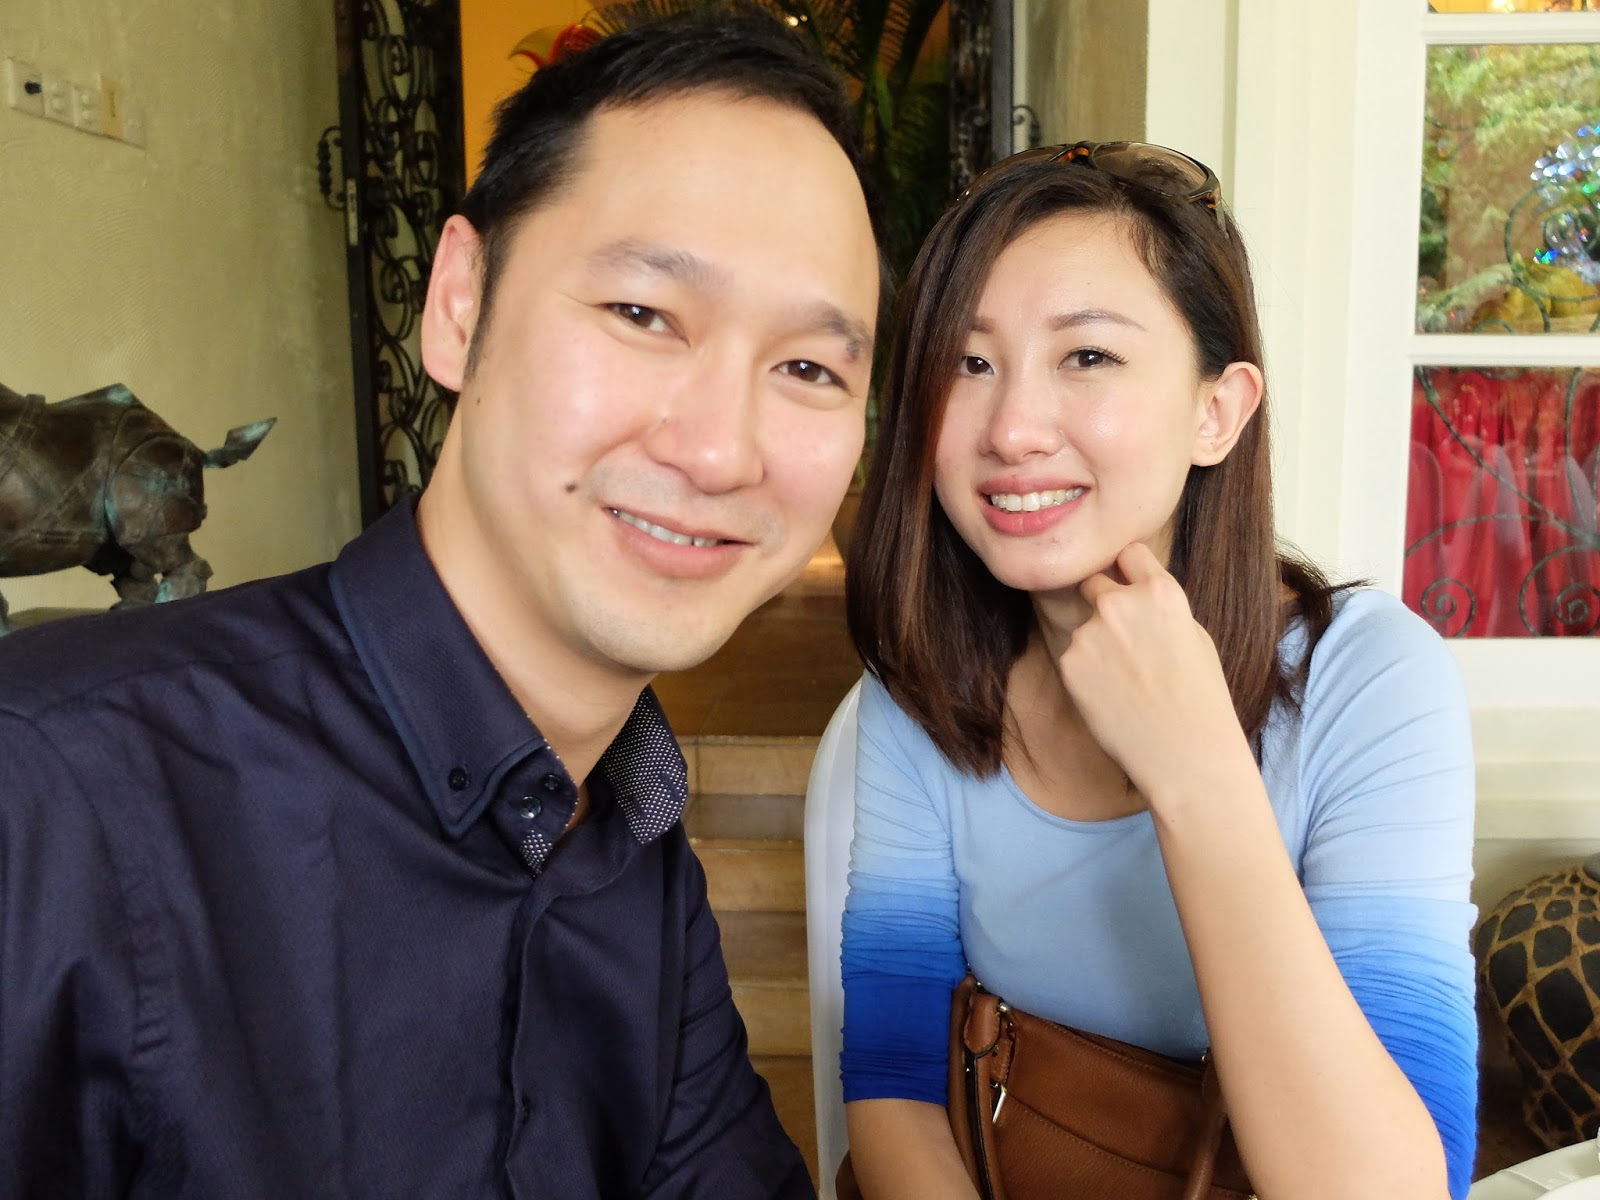 Kee Hua Chee Live!: DATO STEVE DAY AND DATIN SU DAY HOST THEIR EAGERLY  AWAITED ANNUAL CHRISTMAS PARTY ON 20 DECEMBER 2015 AT THEIR PALATIAL  RESIDENCE IN BUKIT TUNKU FOR THEIR DEAREST